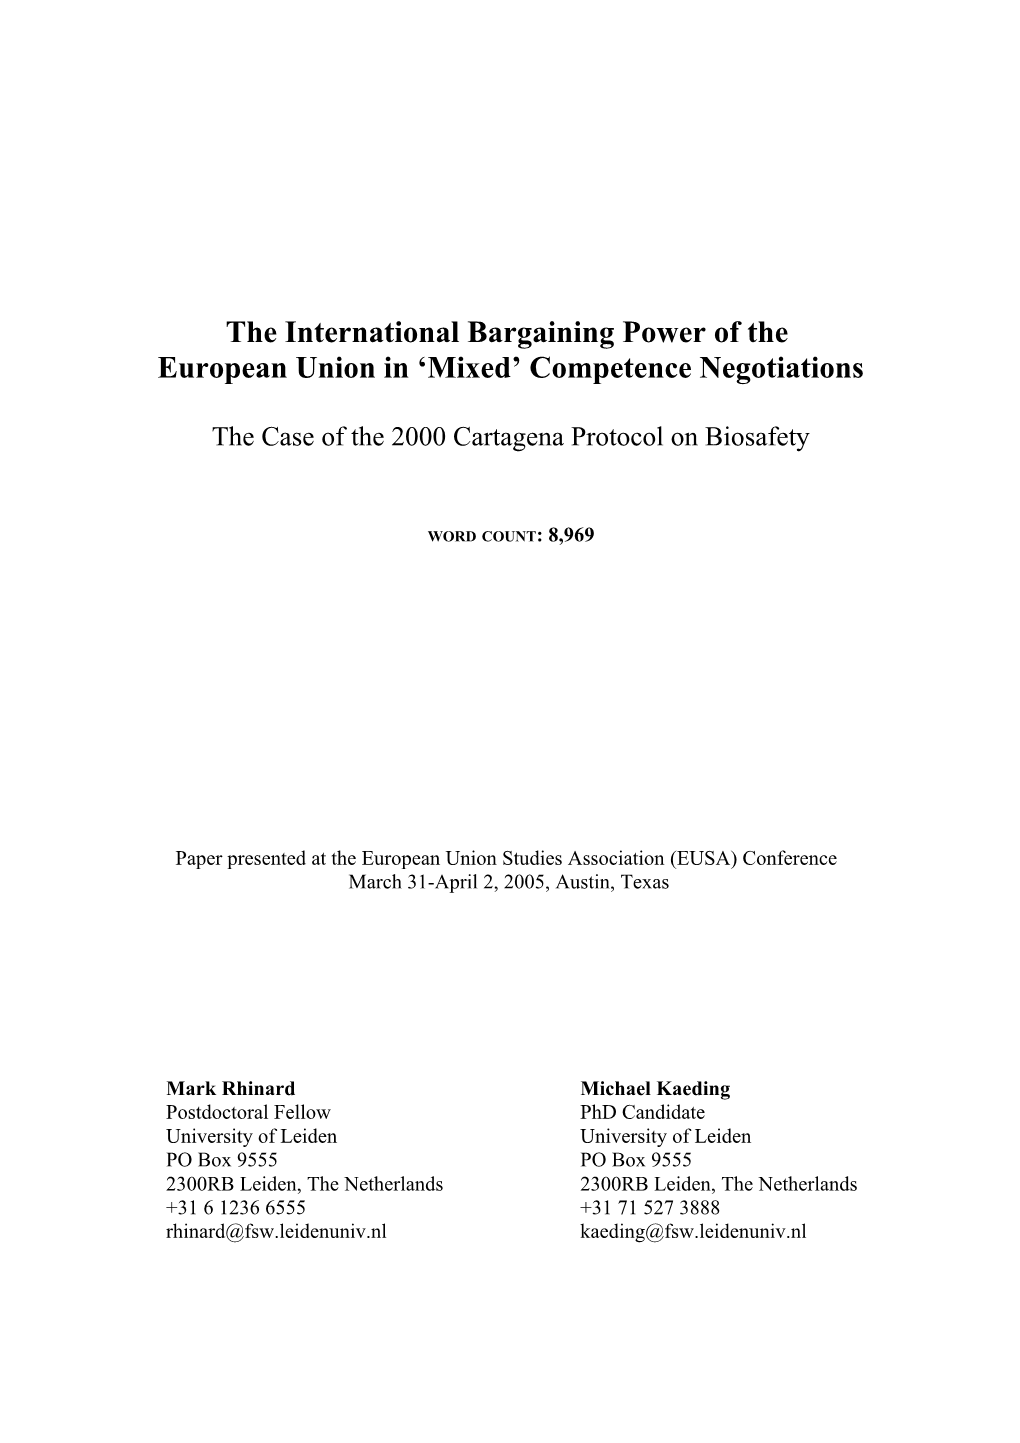 This Paper Represents an Exploratory, Primarily Inductive Effort to Shed Light on the European